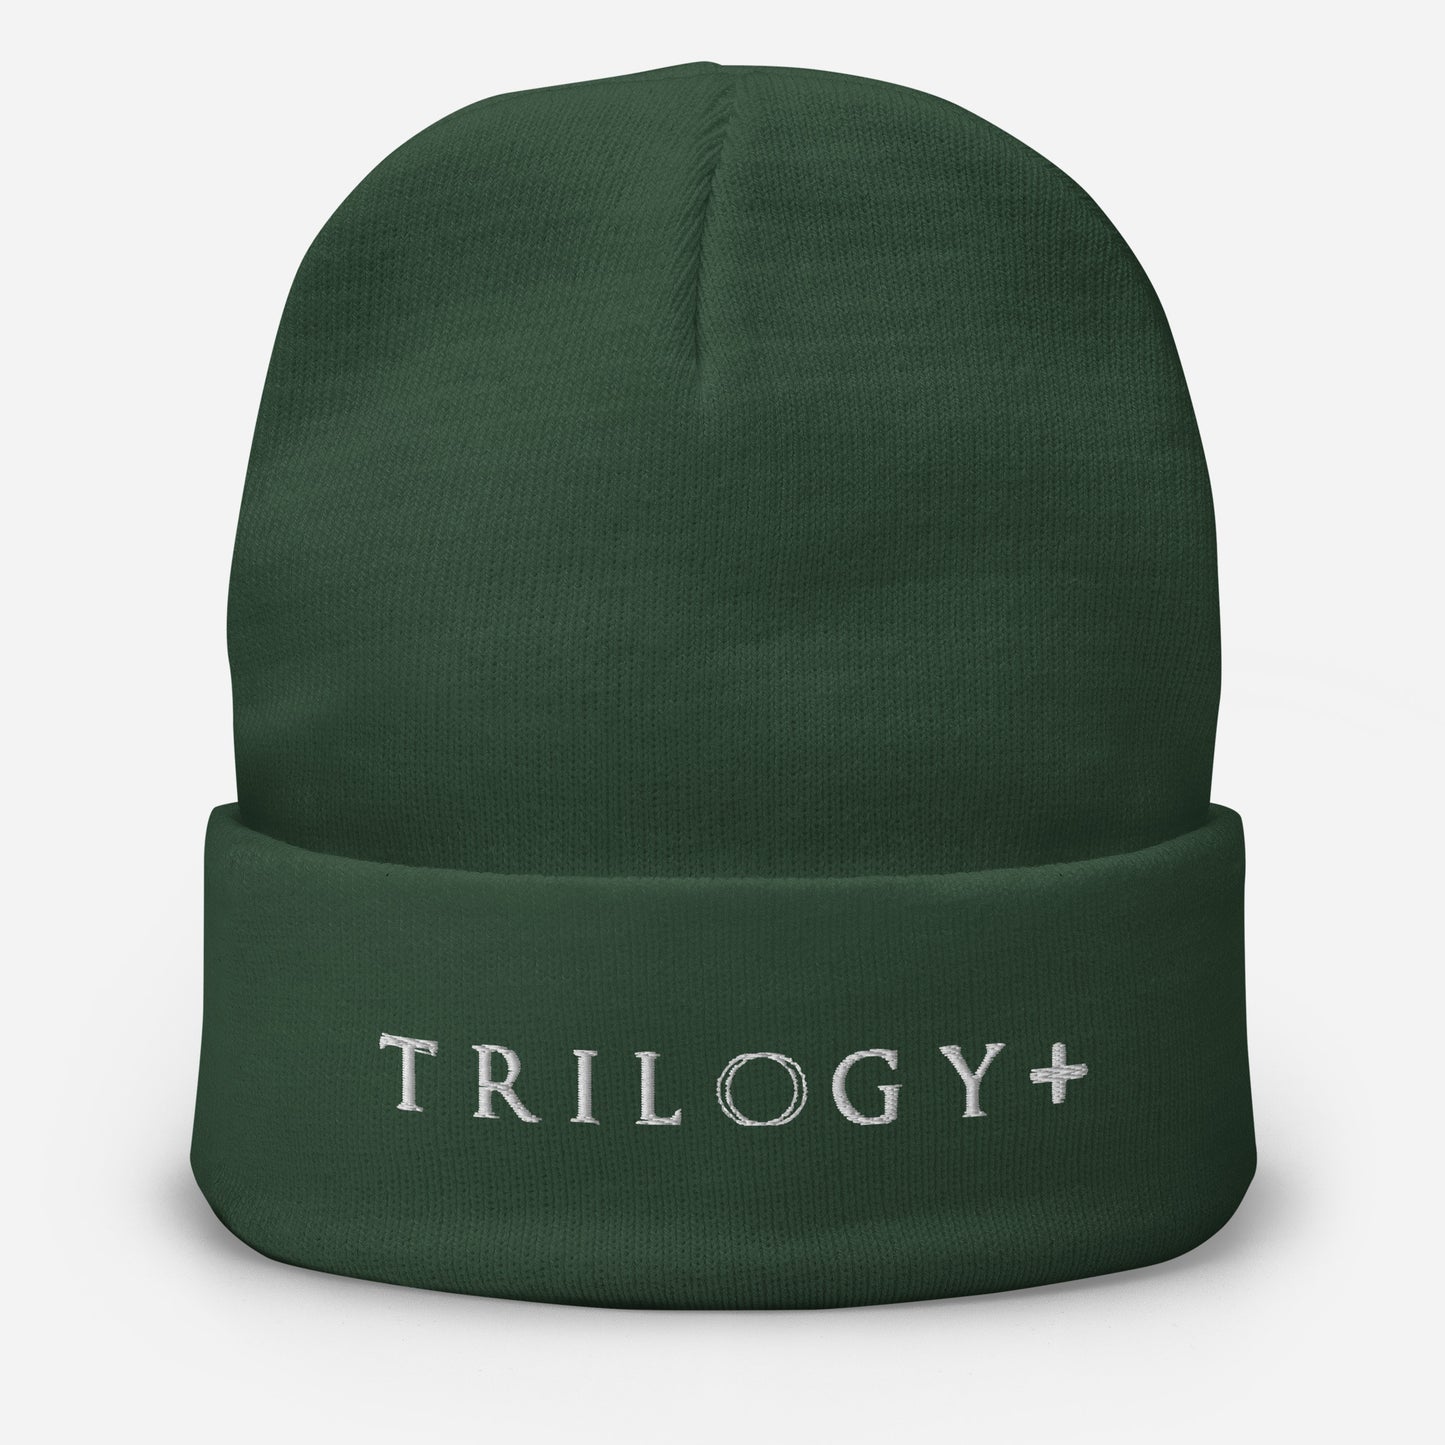 Trilogy Plus | Embroidered Beanie